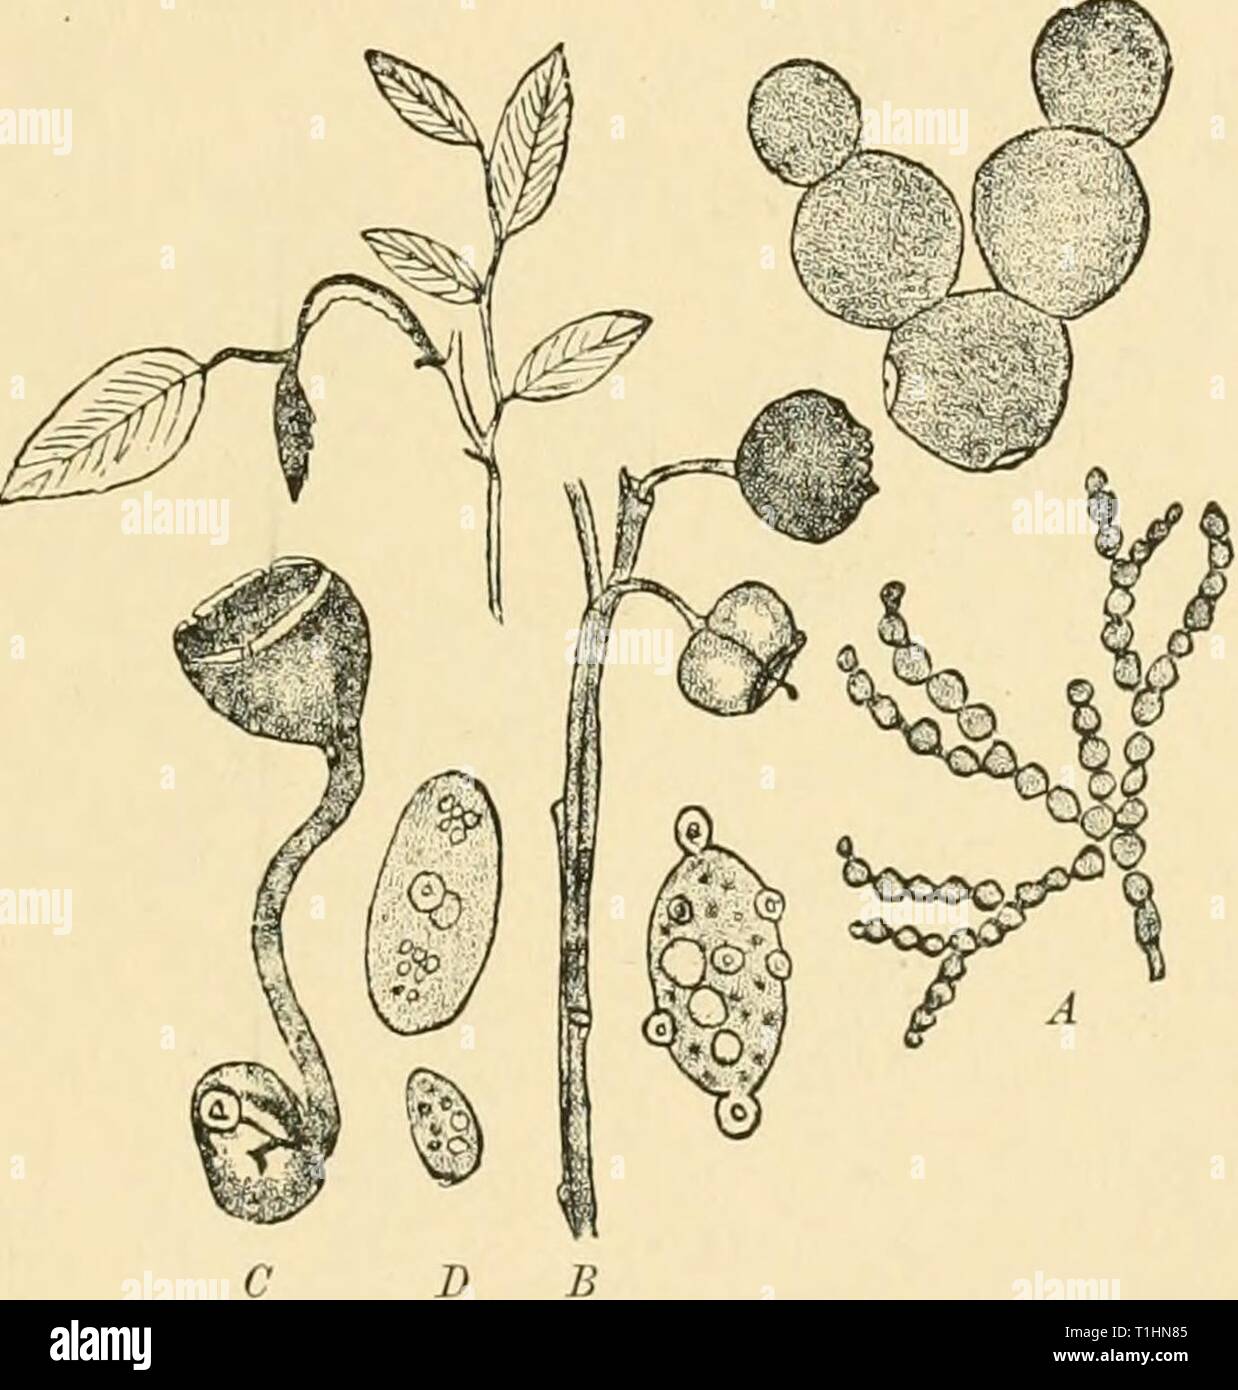 Diseases of plants induced by Diseases of plants induced by cryptogamic parasites; introduction to the study of pathogenic Fungi, slime-Fungi, bacteria, & Algae  diseasesofplants00tube Year: 1897  SCLEROTINIA. 259 cowberry shoots, the stomata being always avoided. In less than three weeks conidia are produced. The mode in which the germ-tubes attack the host-plant is very remarkable. Woronin says: ' The gerra-tubes developed from the ascospores grow inwards towards the vascular bundles of the host-plant and enter them; then they continue to develop, but now in the opposite direction from the i Stock Photo